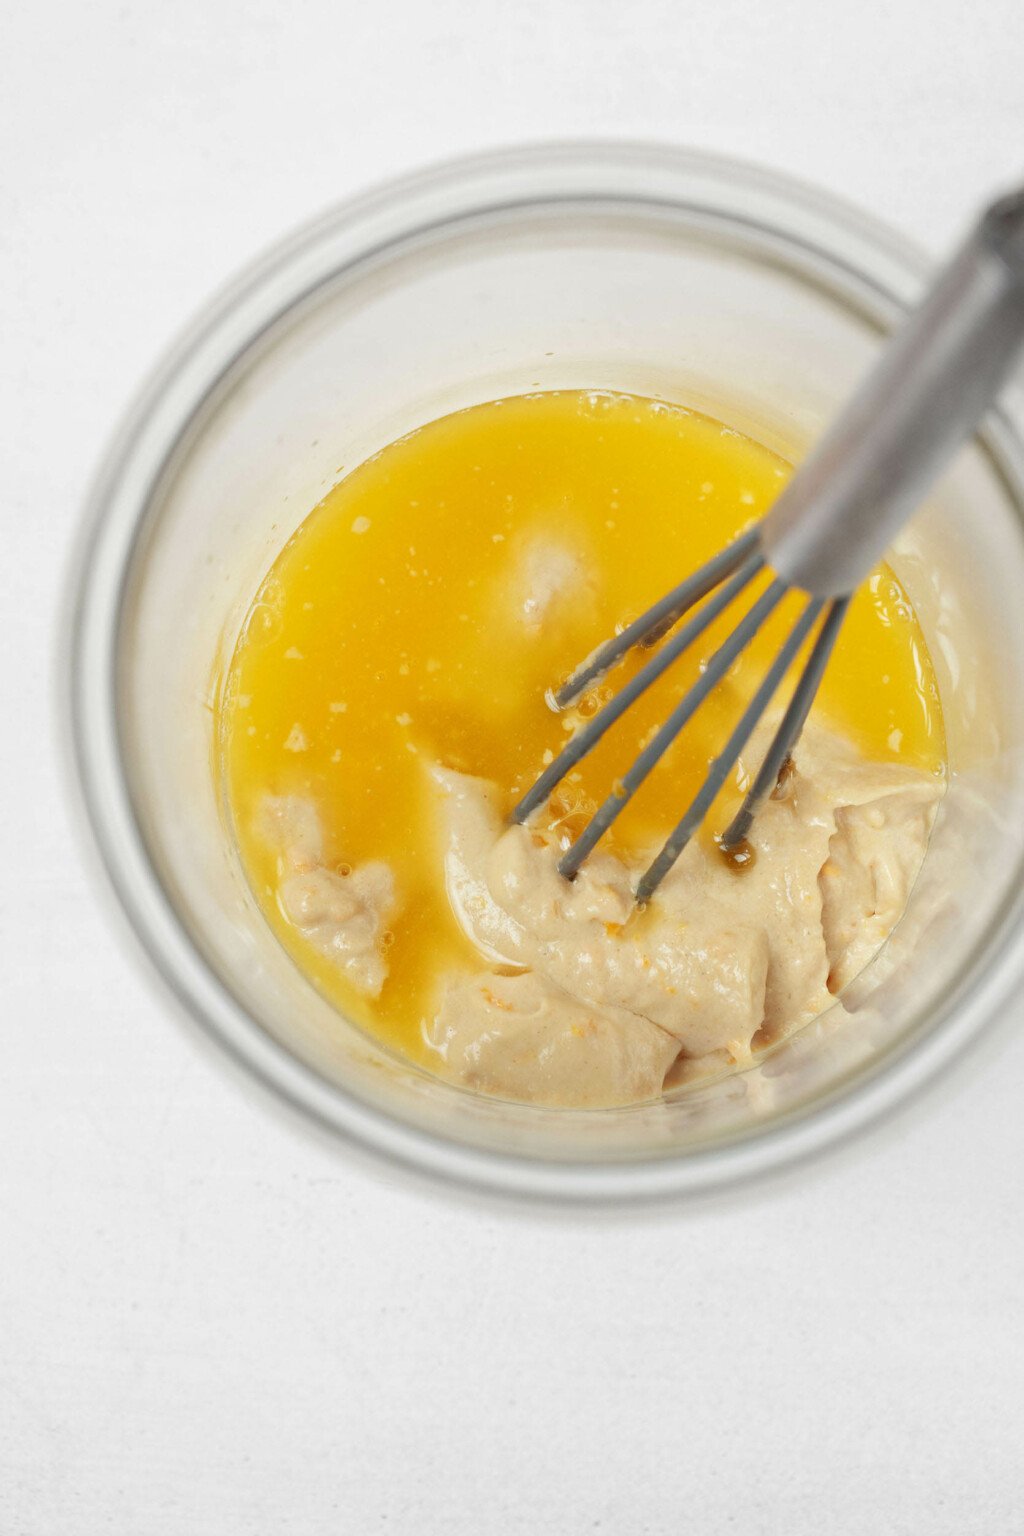 Freshly squeezed orange juice and thick, creamy tahini are being mixed with a small metal whisk.